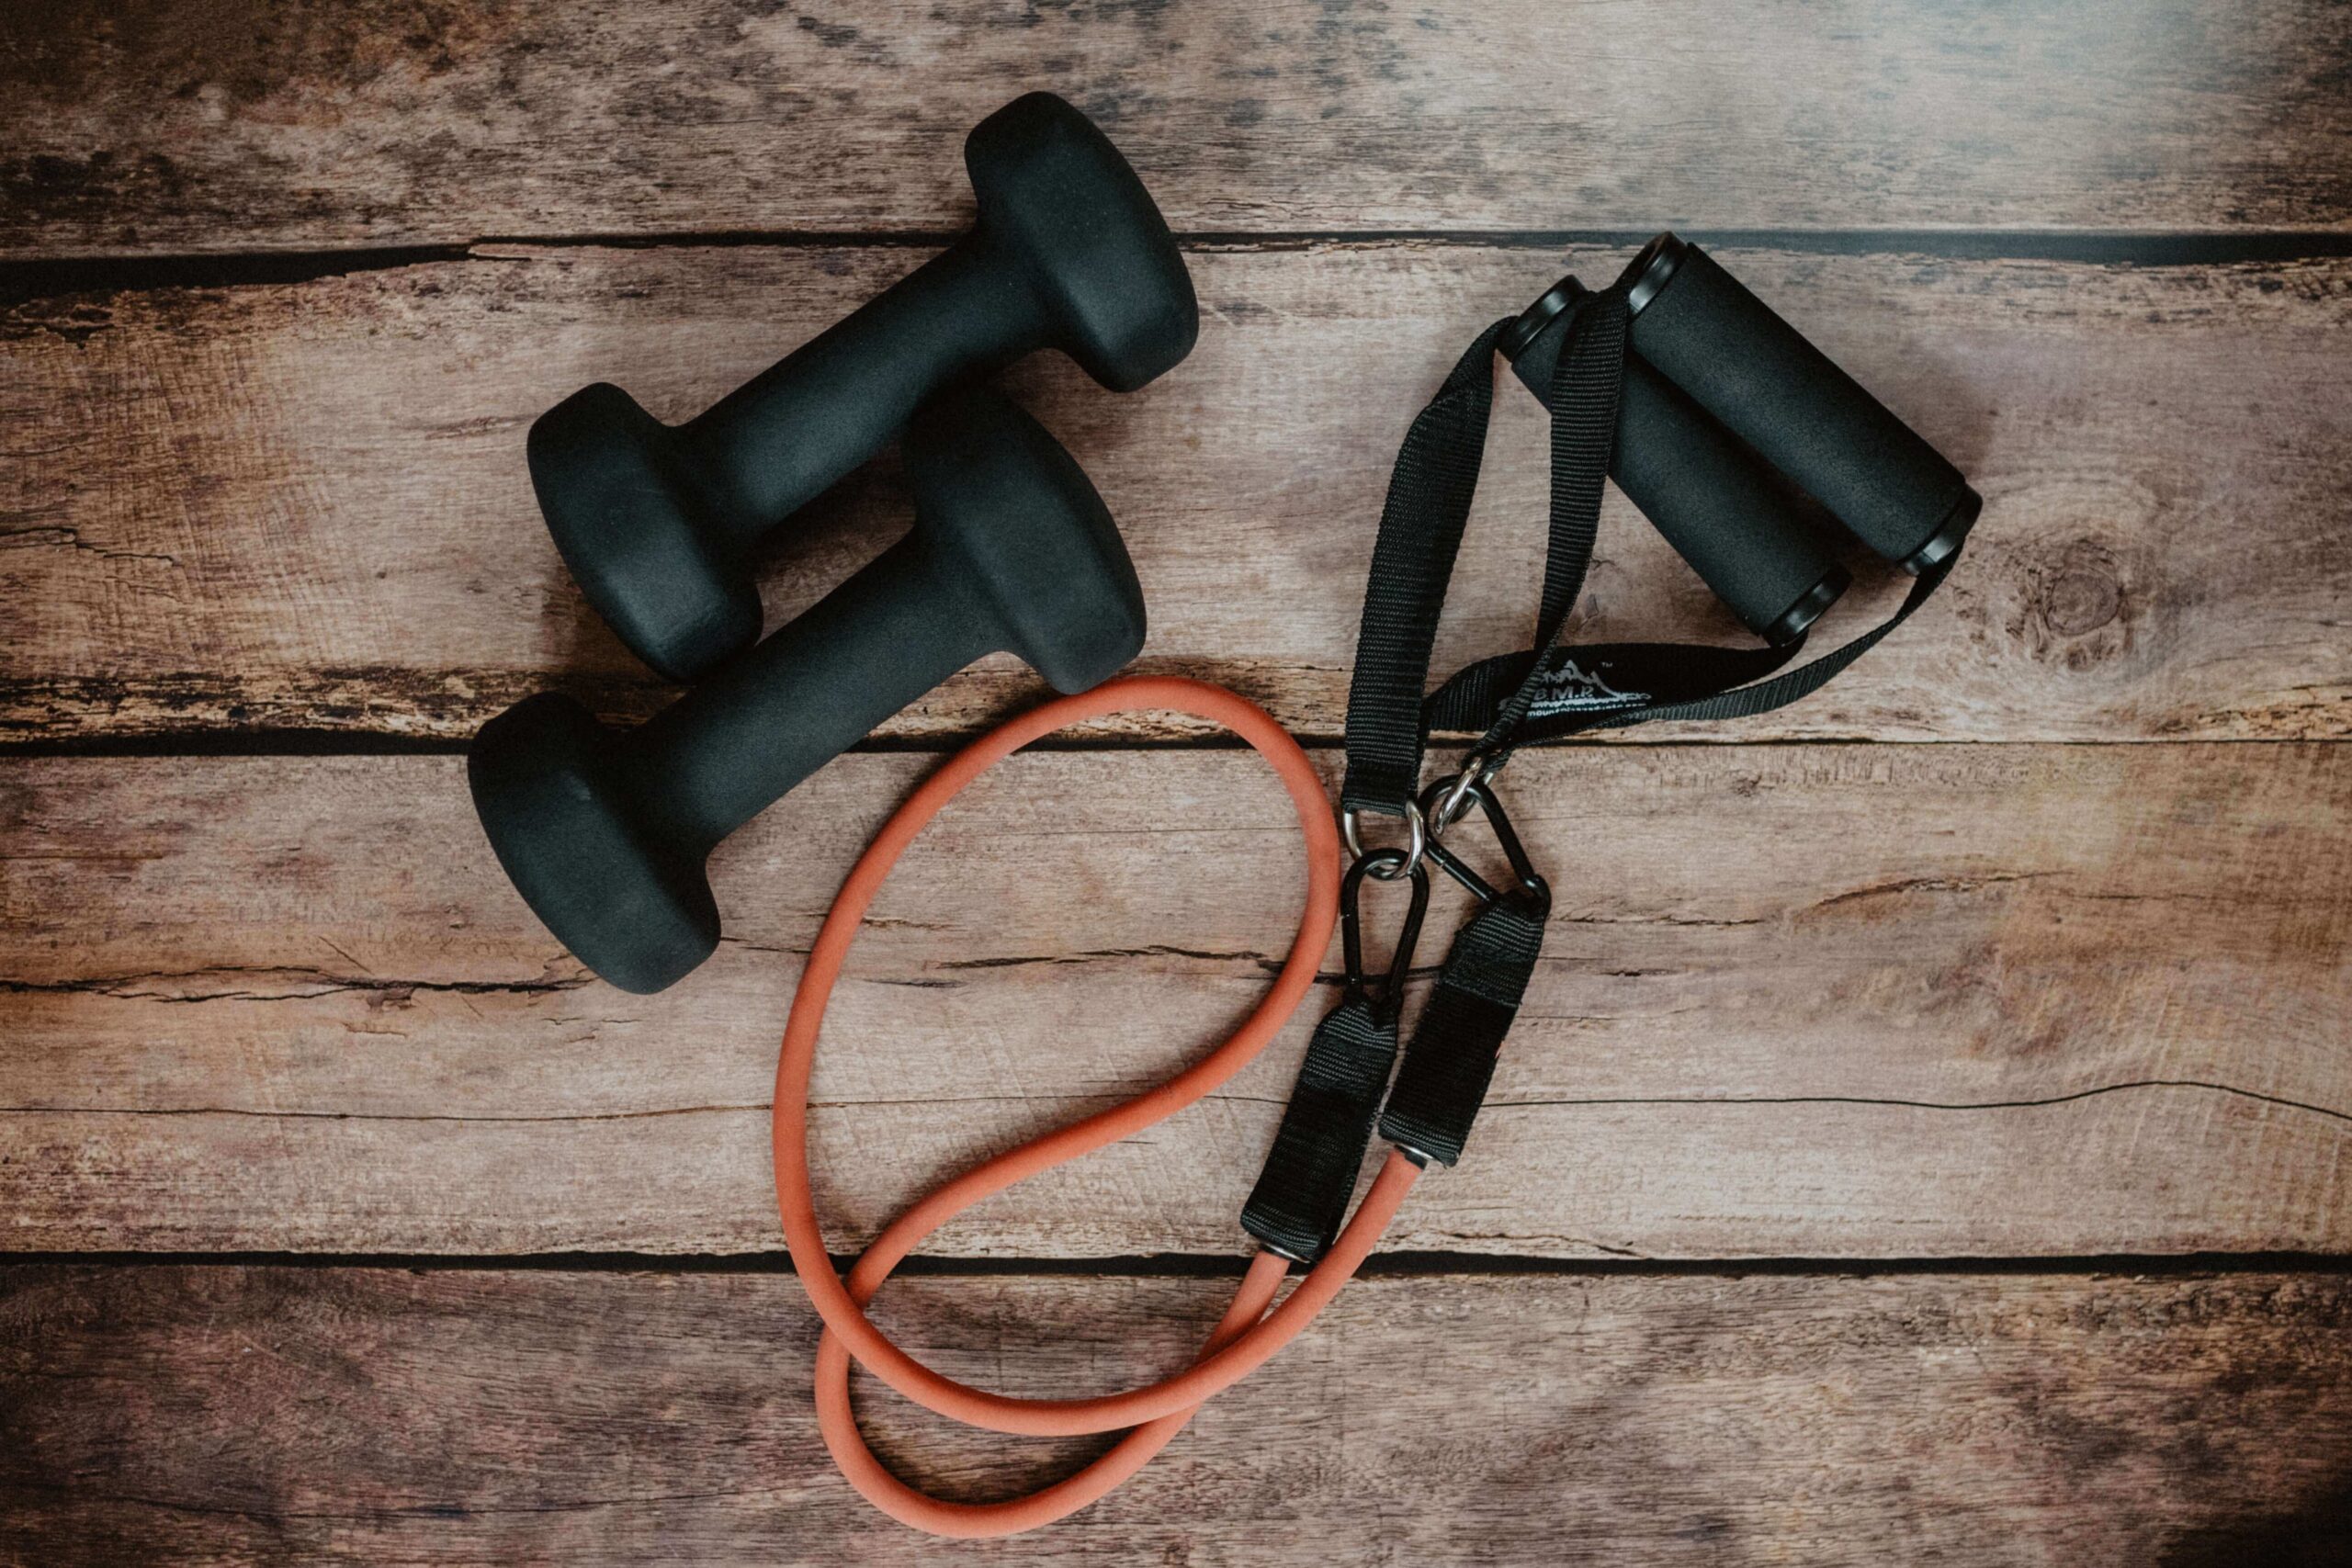 dumbbells and resistance band for at-home workouts